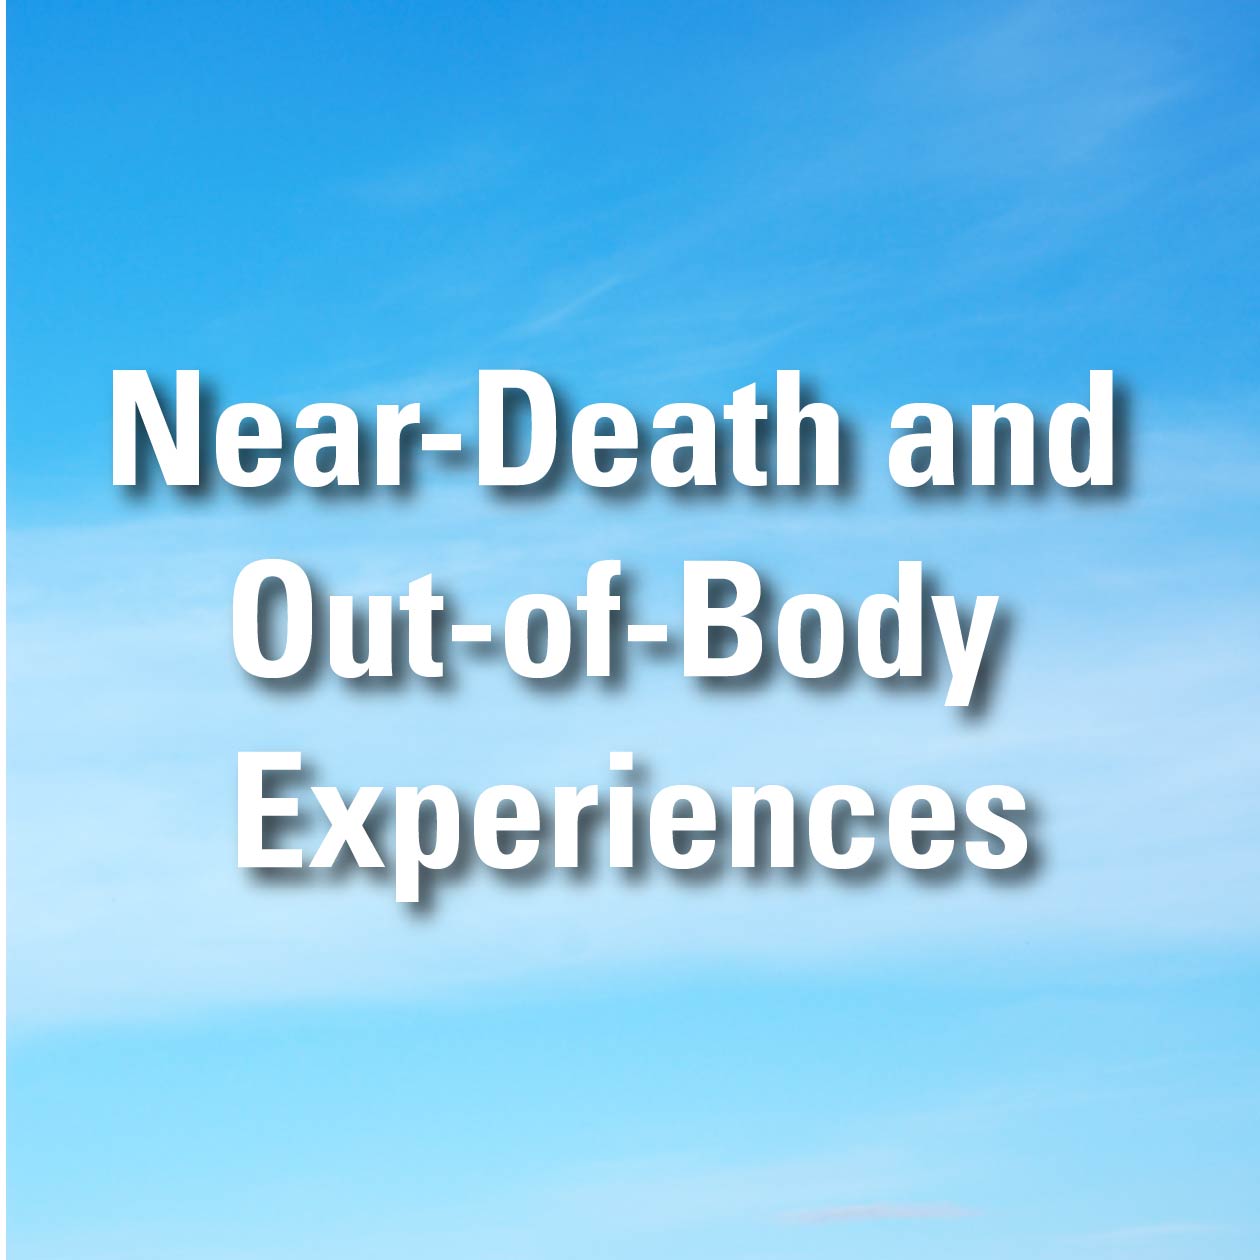 Near-Death & Out-of-Body Experiences | Expand with Julius and Xpnsion Network